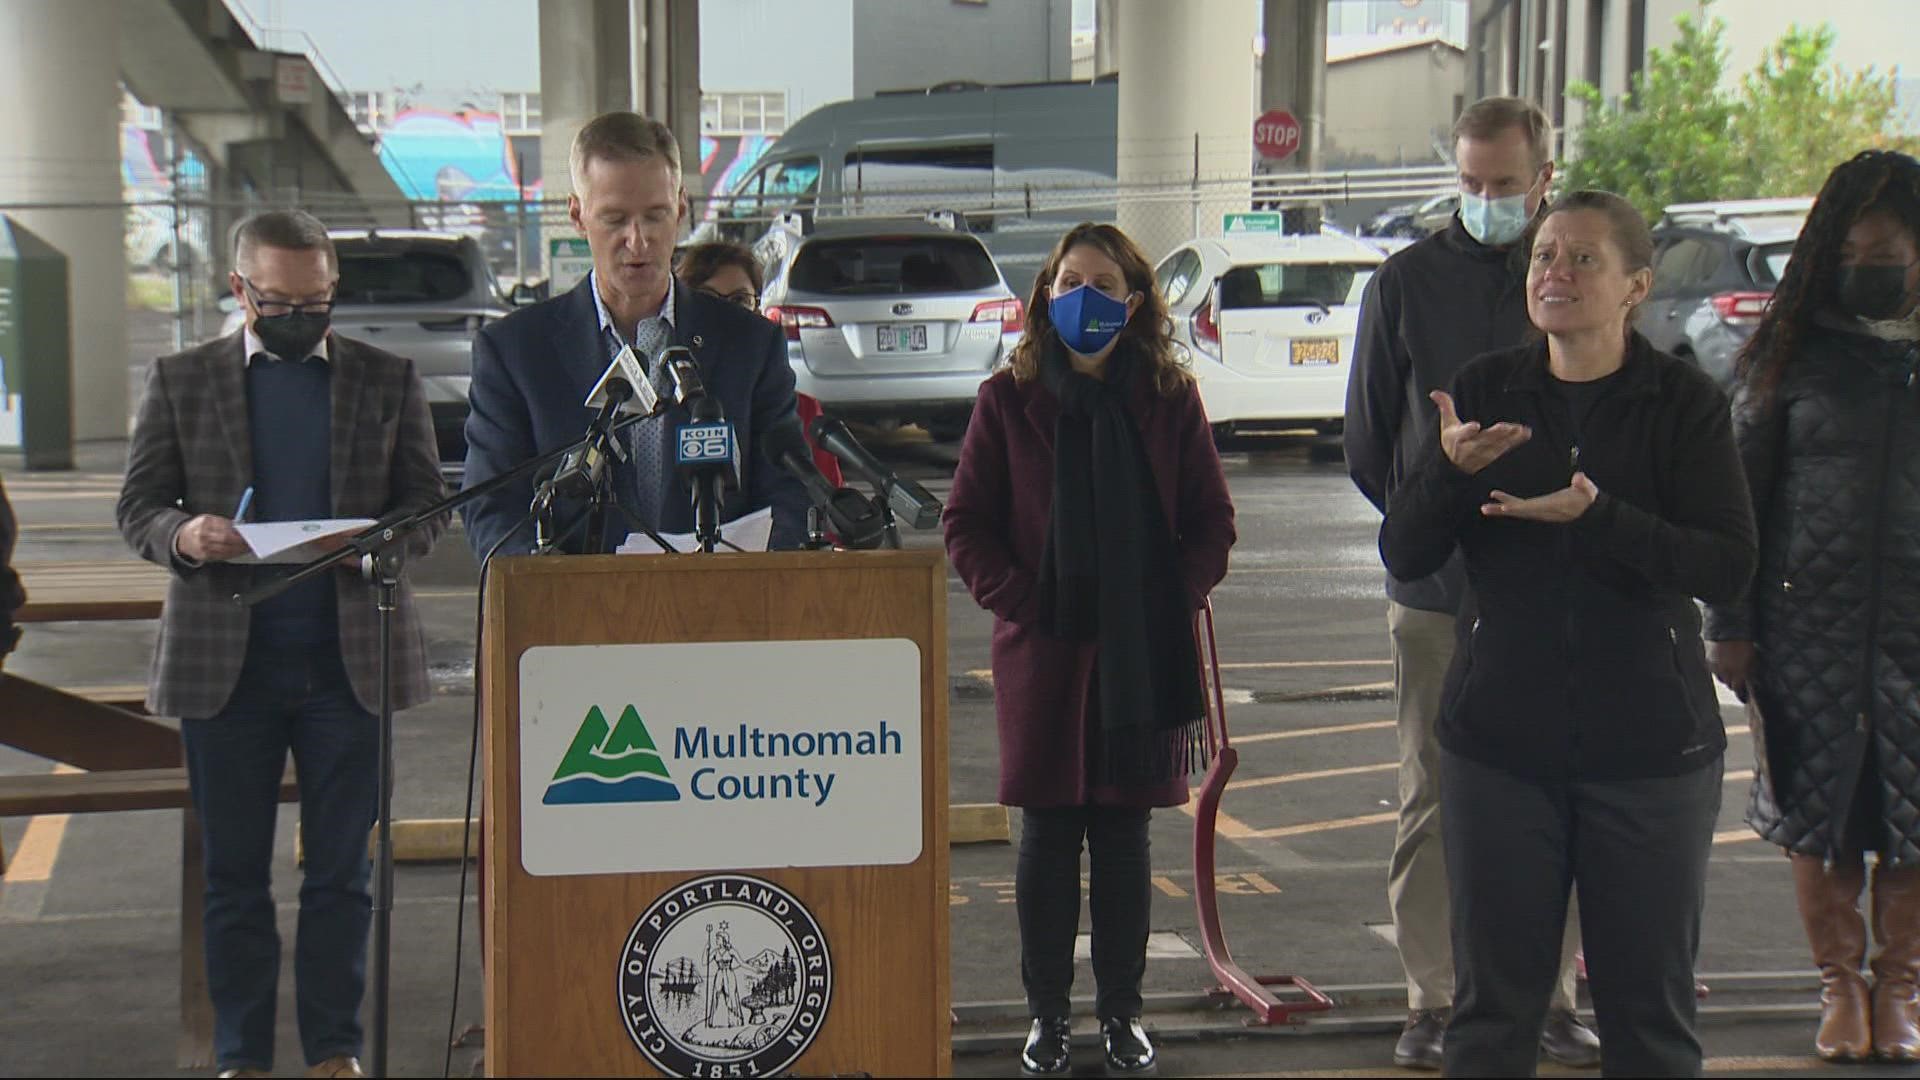 Portland and Multnomah County officials announced $38 million in new homeless aid programs on Monday. The funding comes from an unexpected fall budget surplus.